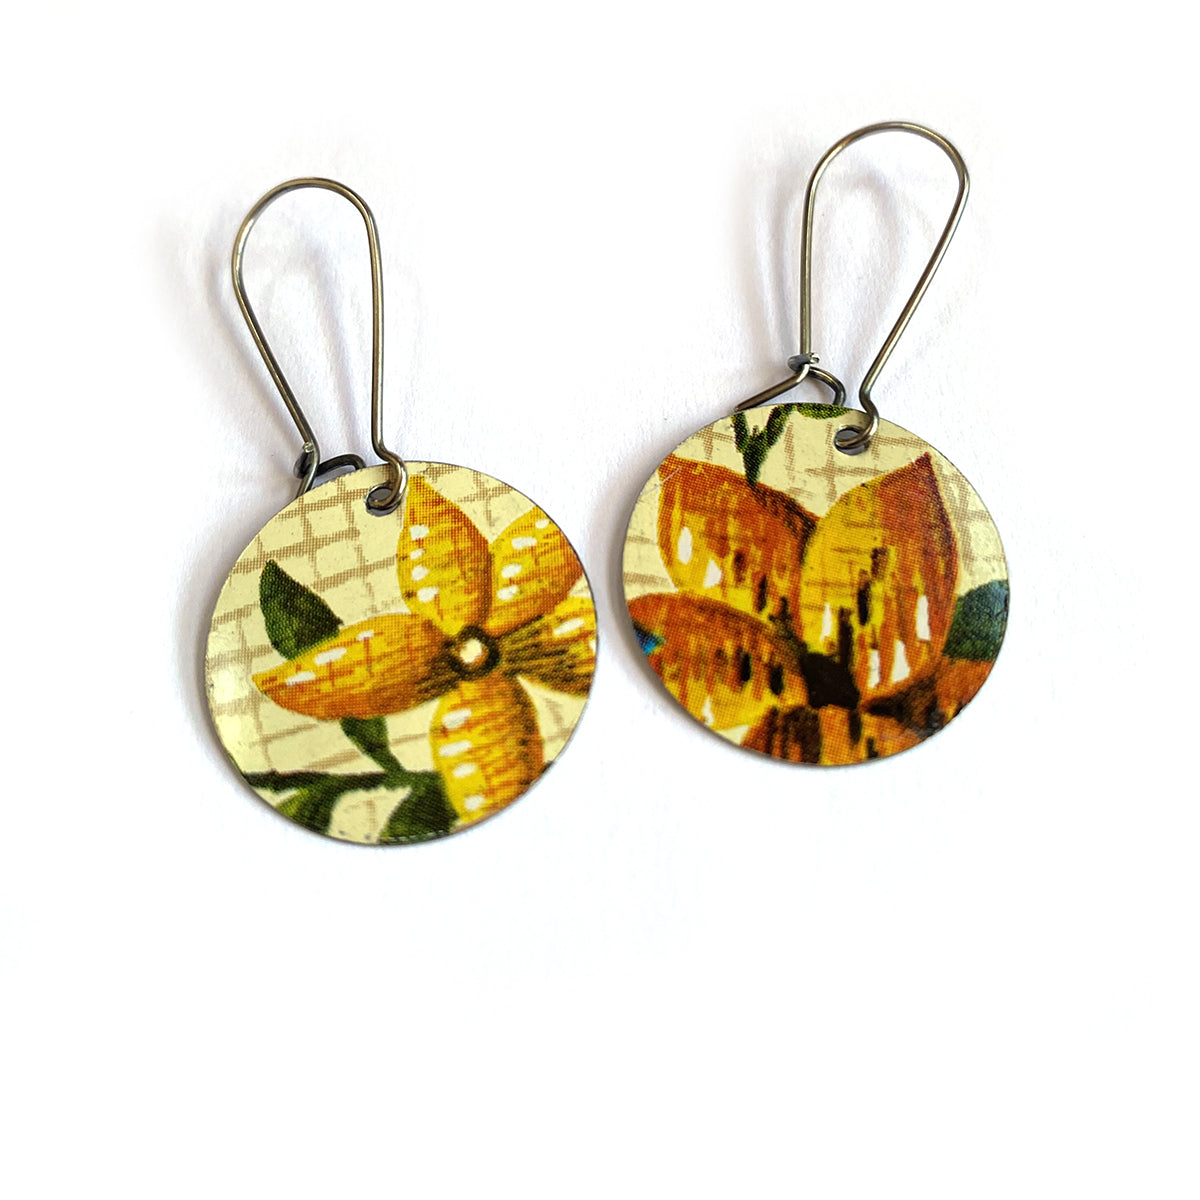 Recycled Tin Earrings with floral pattern